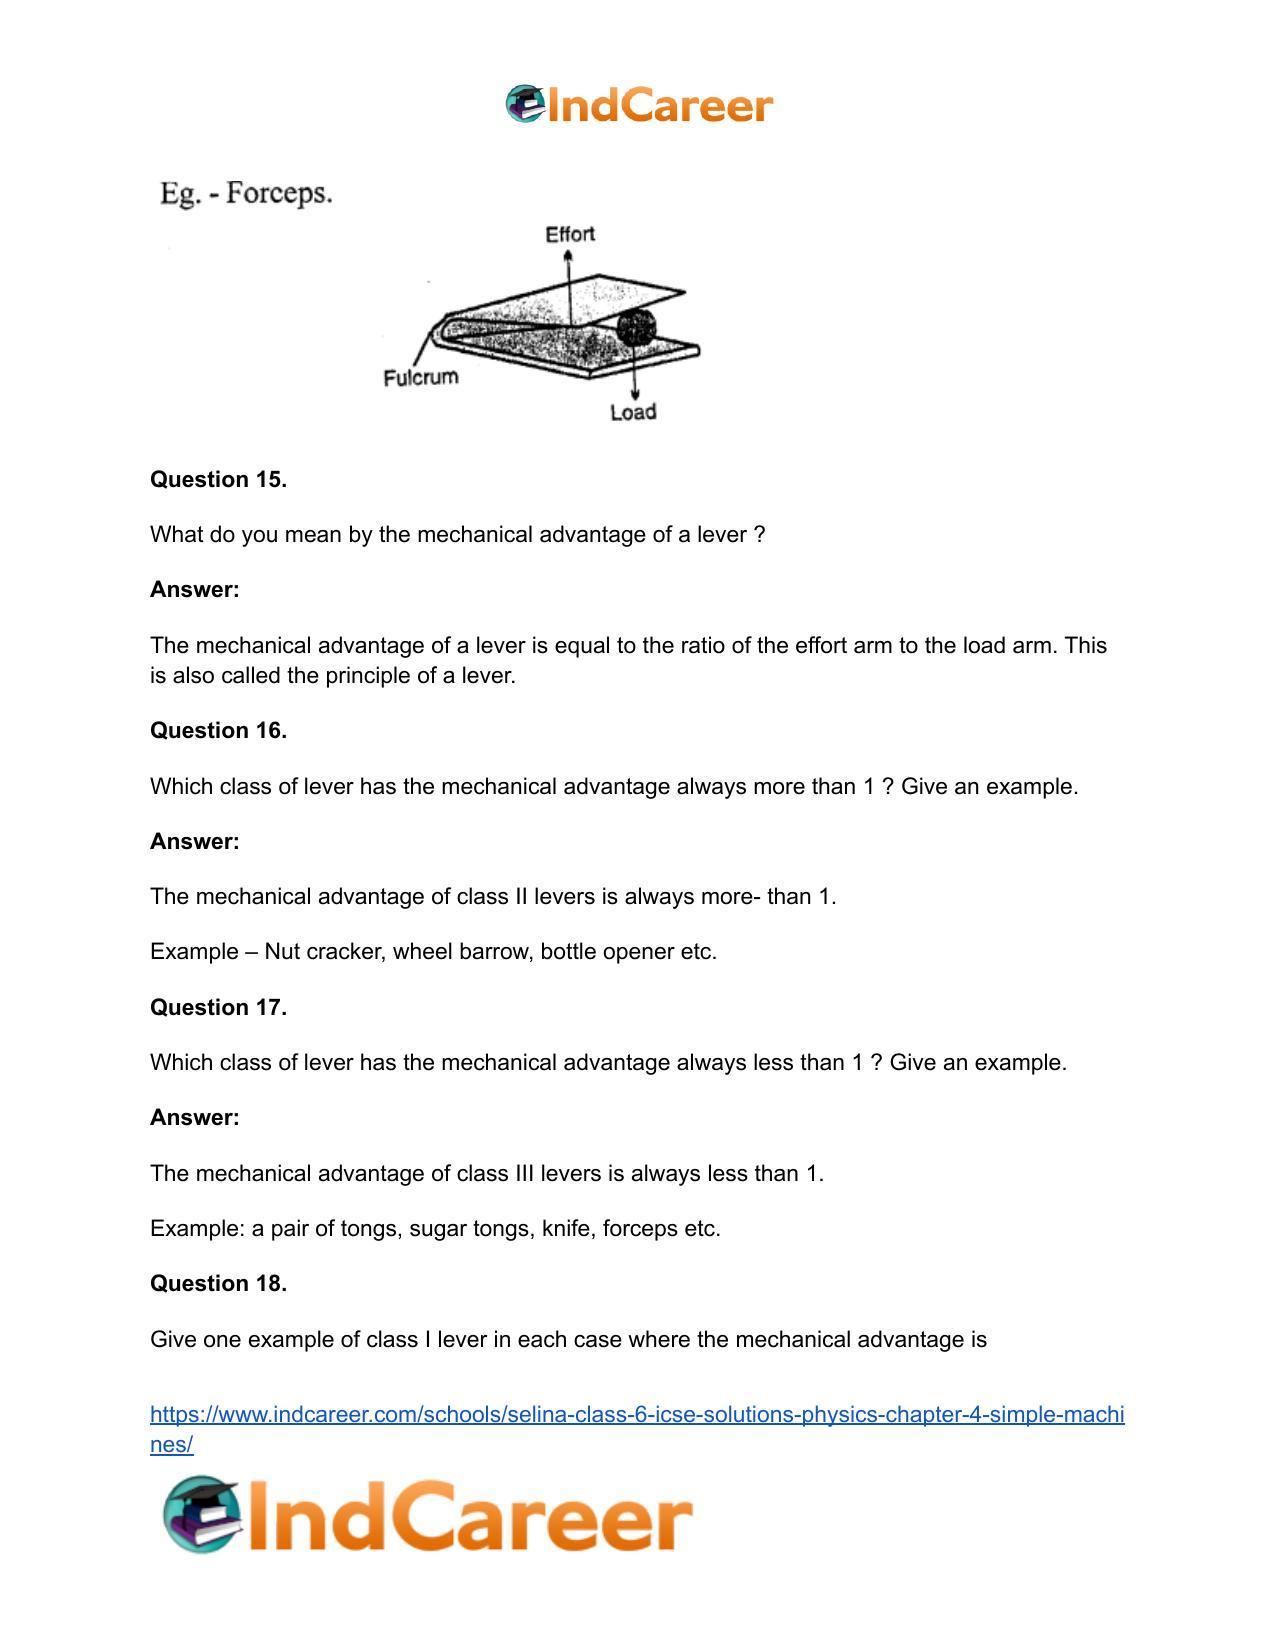 Selina Class 6 ICSE Solutions Physics : Chapter 4- Simple Machines - Page 9